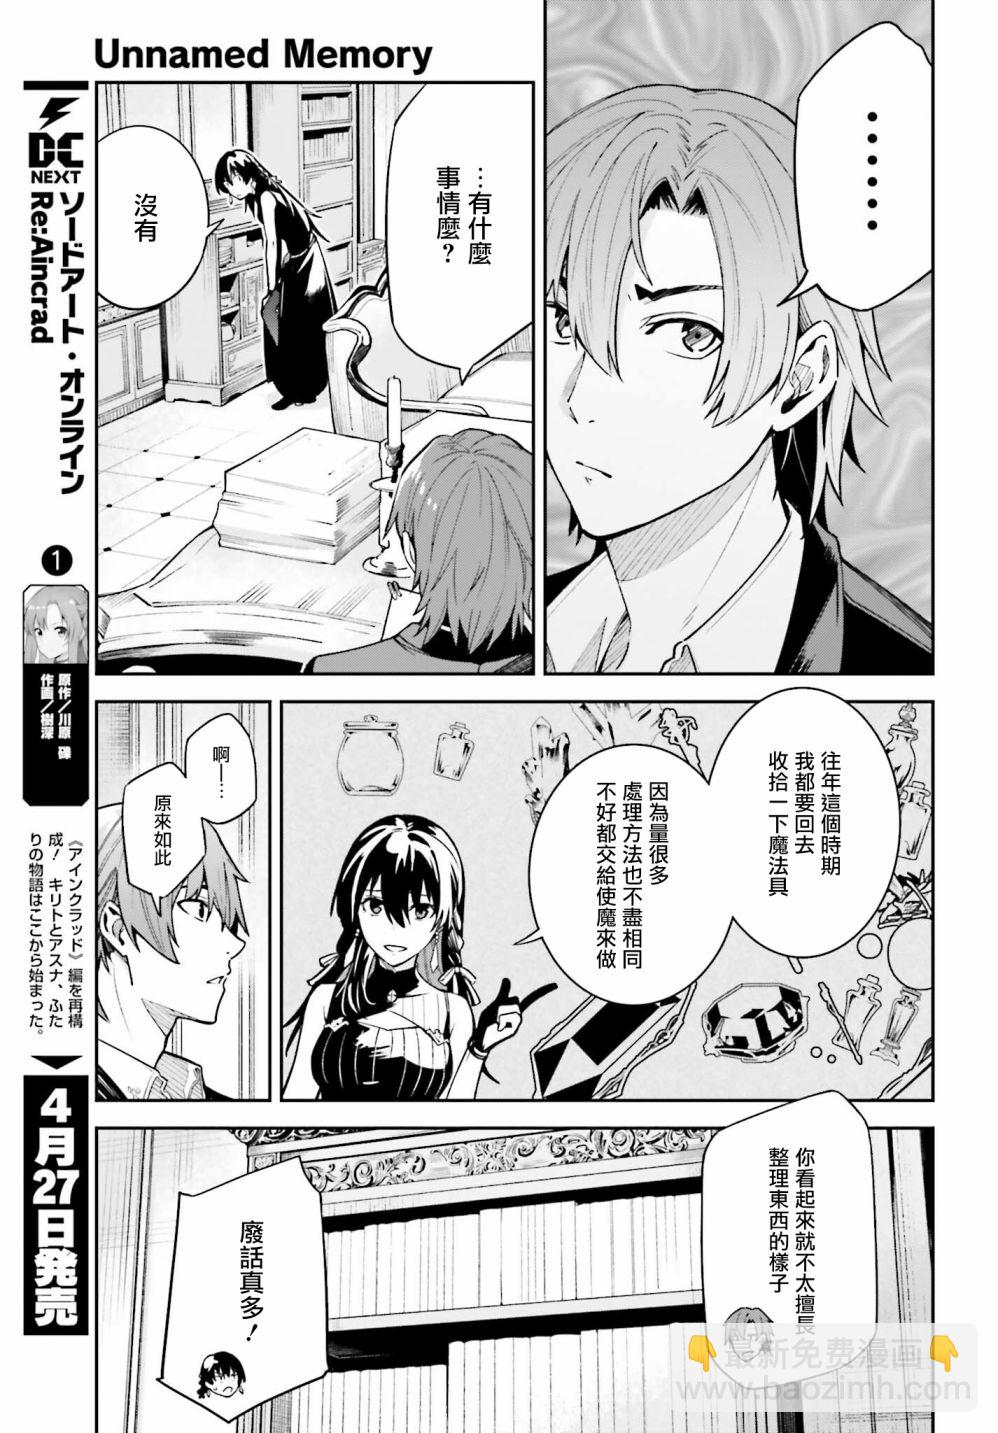 Unnamed Memory - 第16.5話 - 1